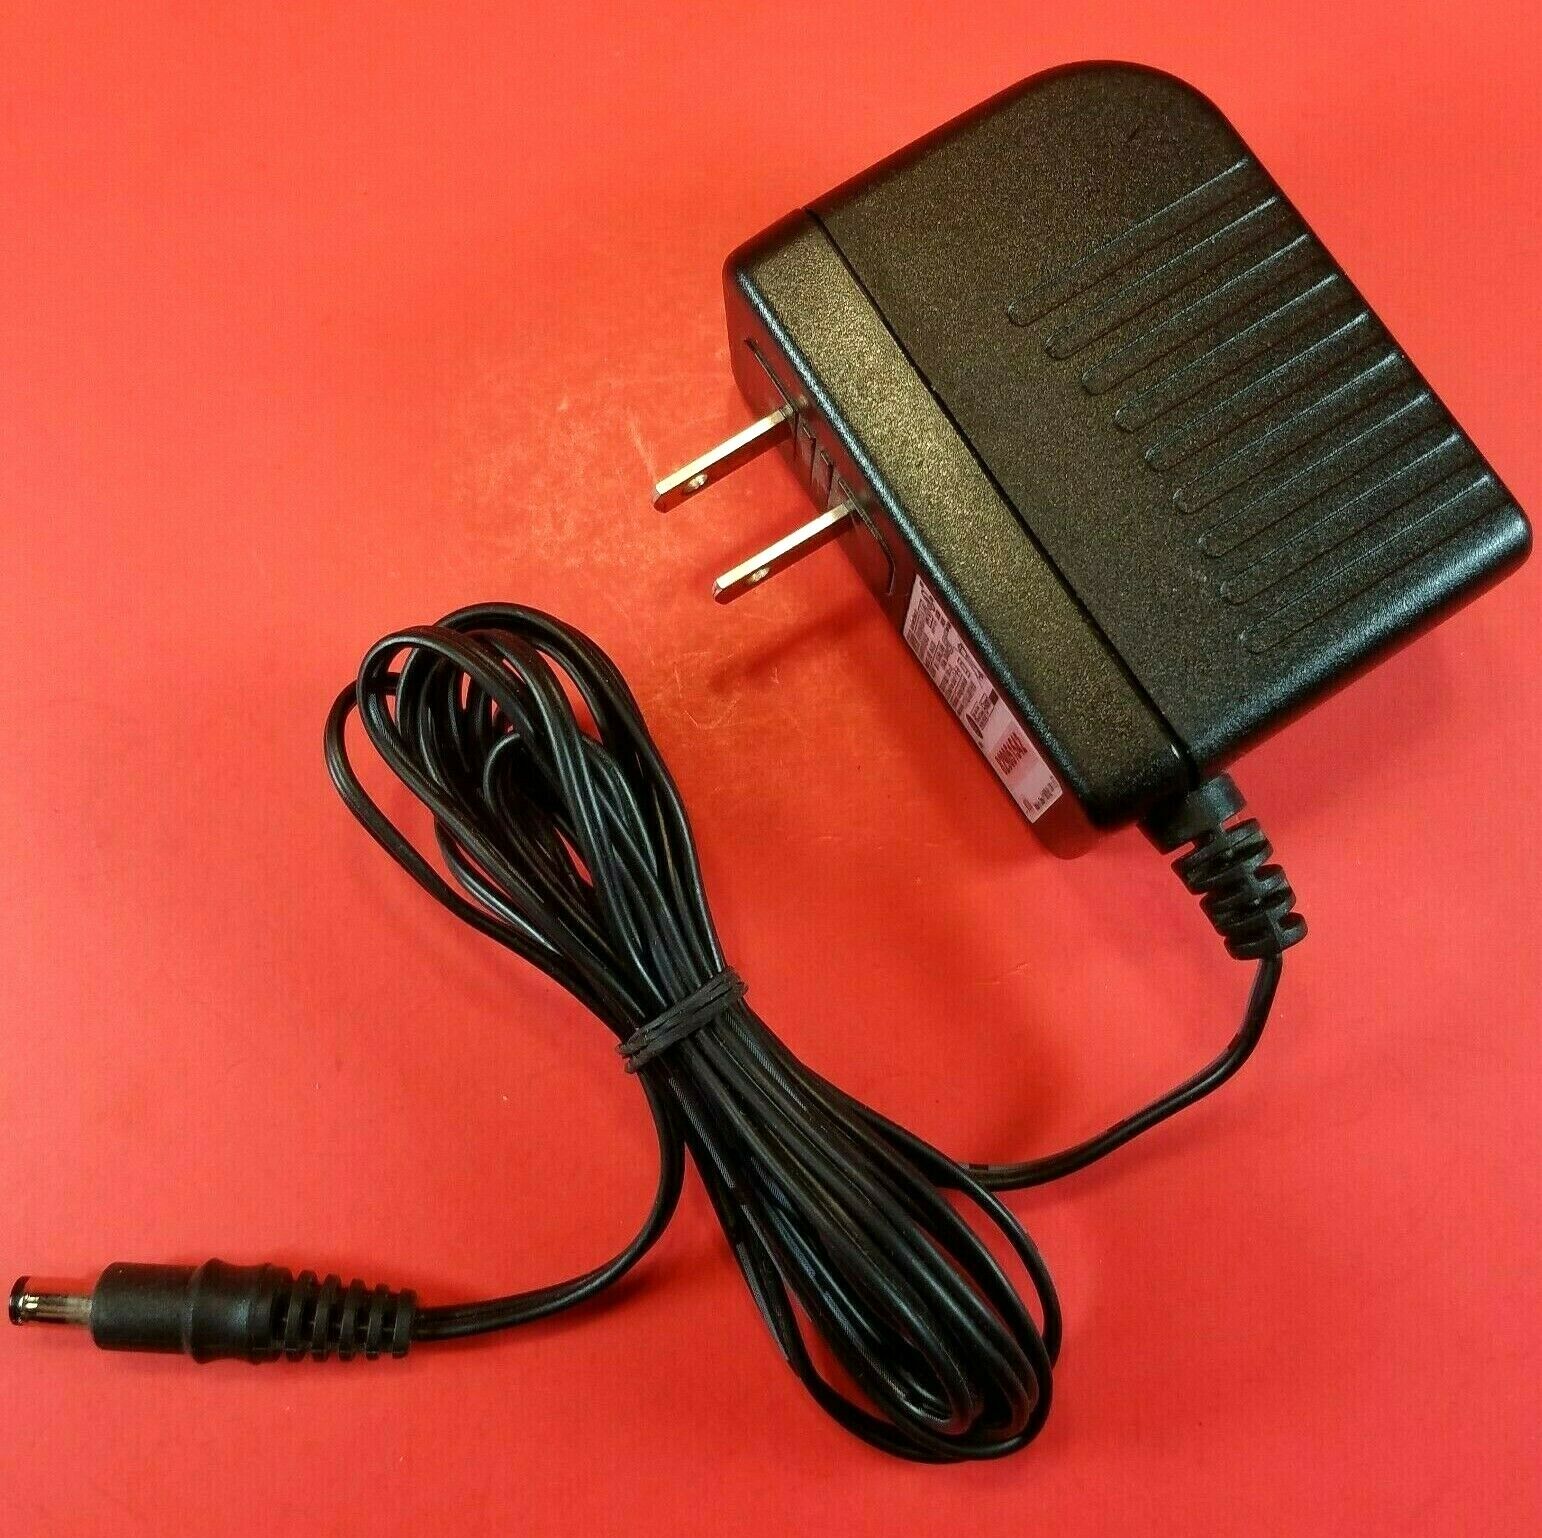 APD WA-24C12U Power Supply Adaptor 12V - 2A OEM AC Adapter Charger Cord Cable Type: AC Adapter Output Voltage: 12 V Fe